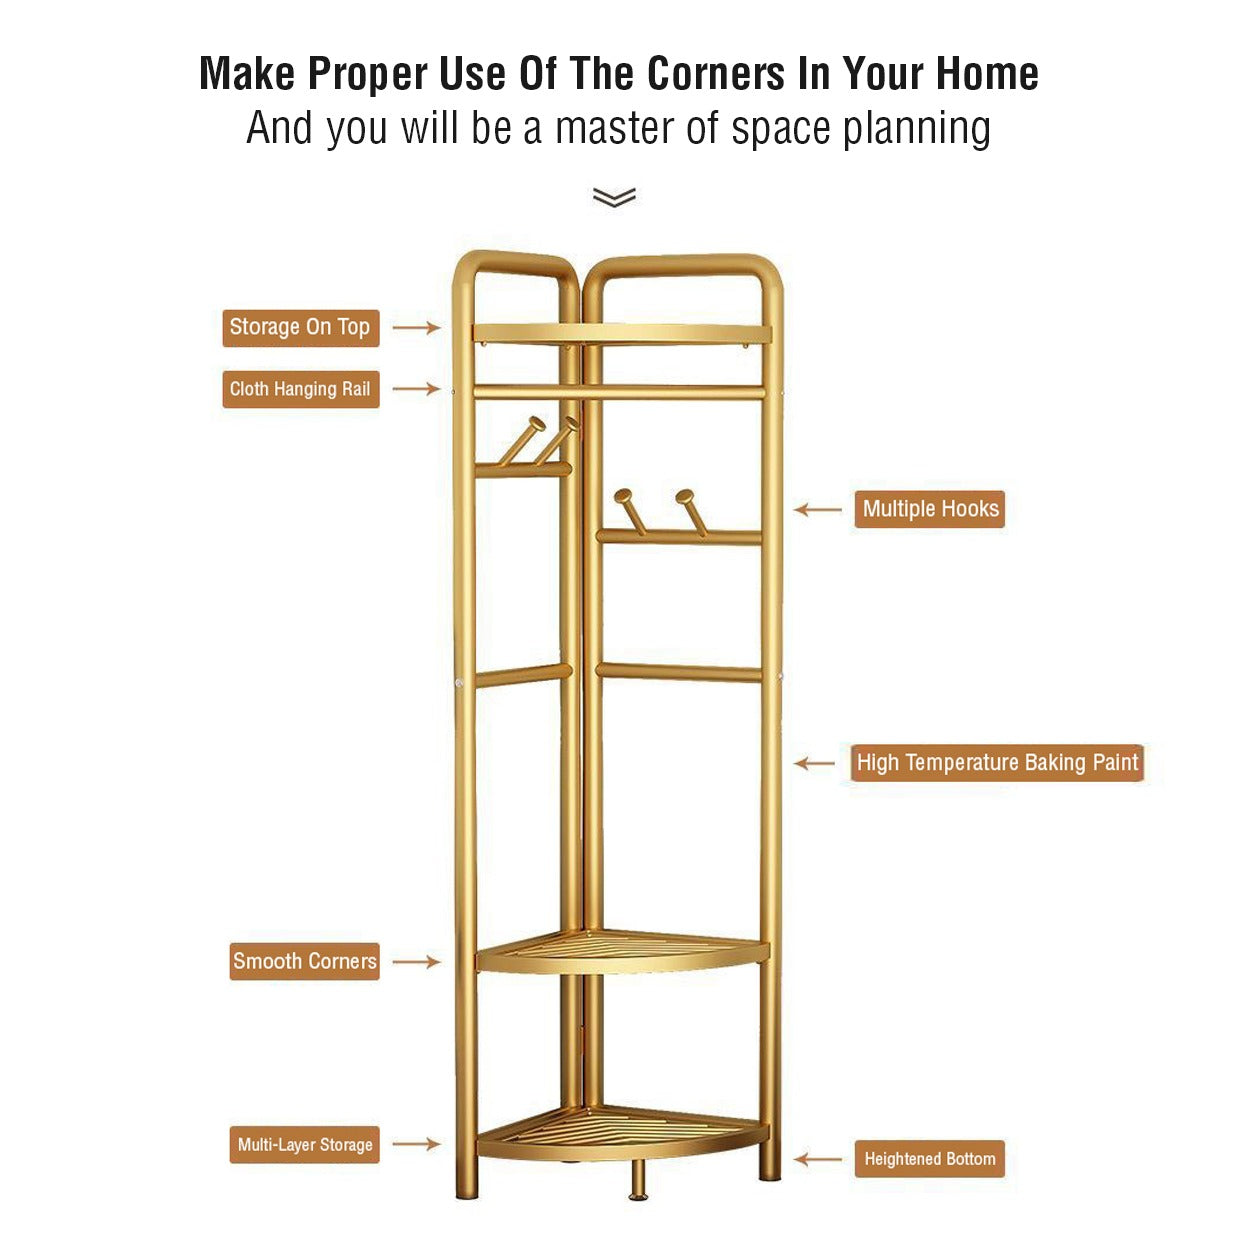 Picture tells the proper use of the corners in home so that you will be a master of space planning. Then tells us about the feature of hanging rack- Storage on top, cloth hanging area, multiple hooks, high temperature baking paint, smooth corners, multiple layer storage, hightened bottom. 